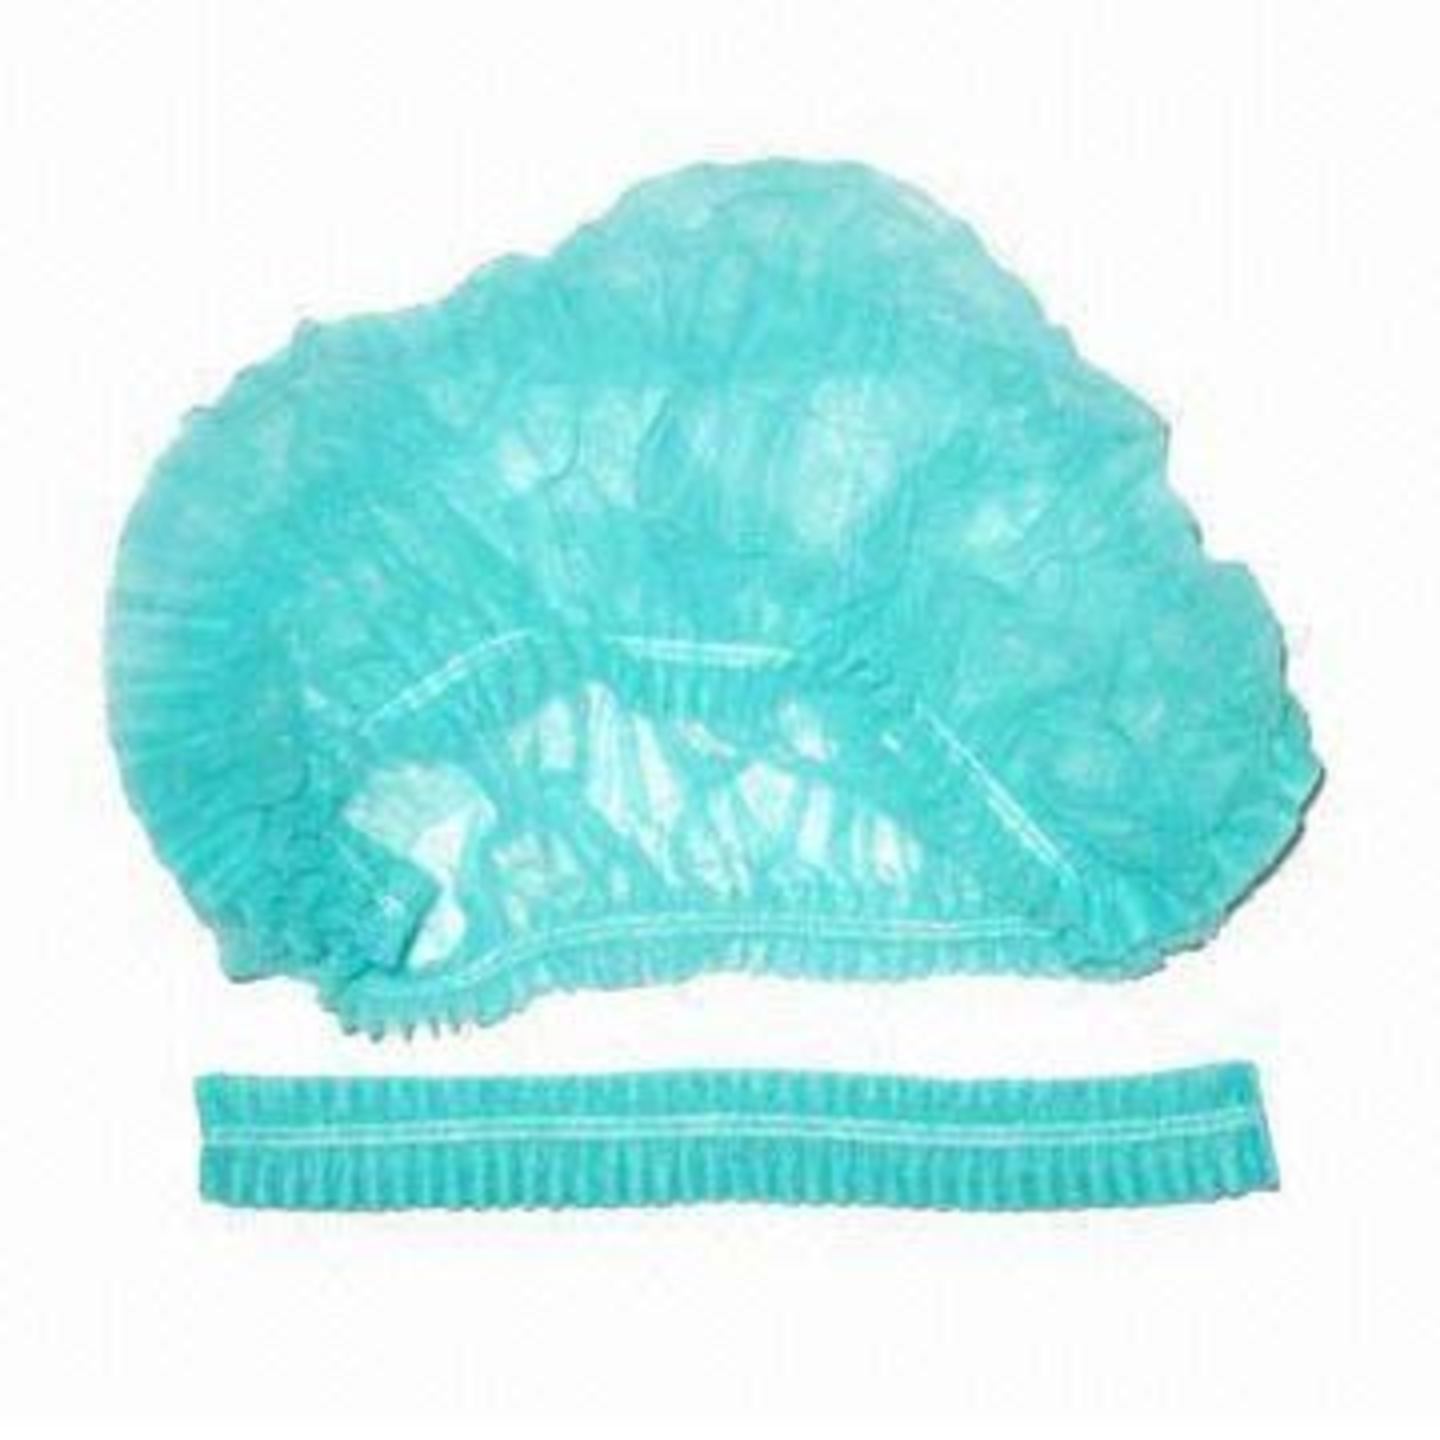 Surgical Cap pack of 100 Pcs